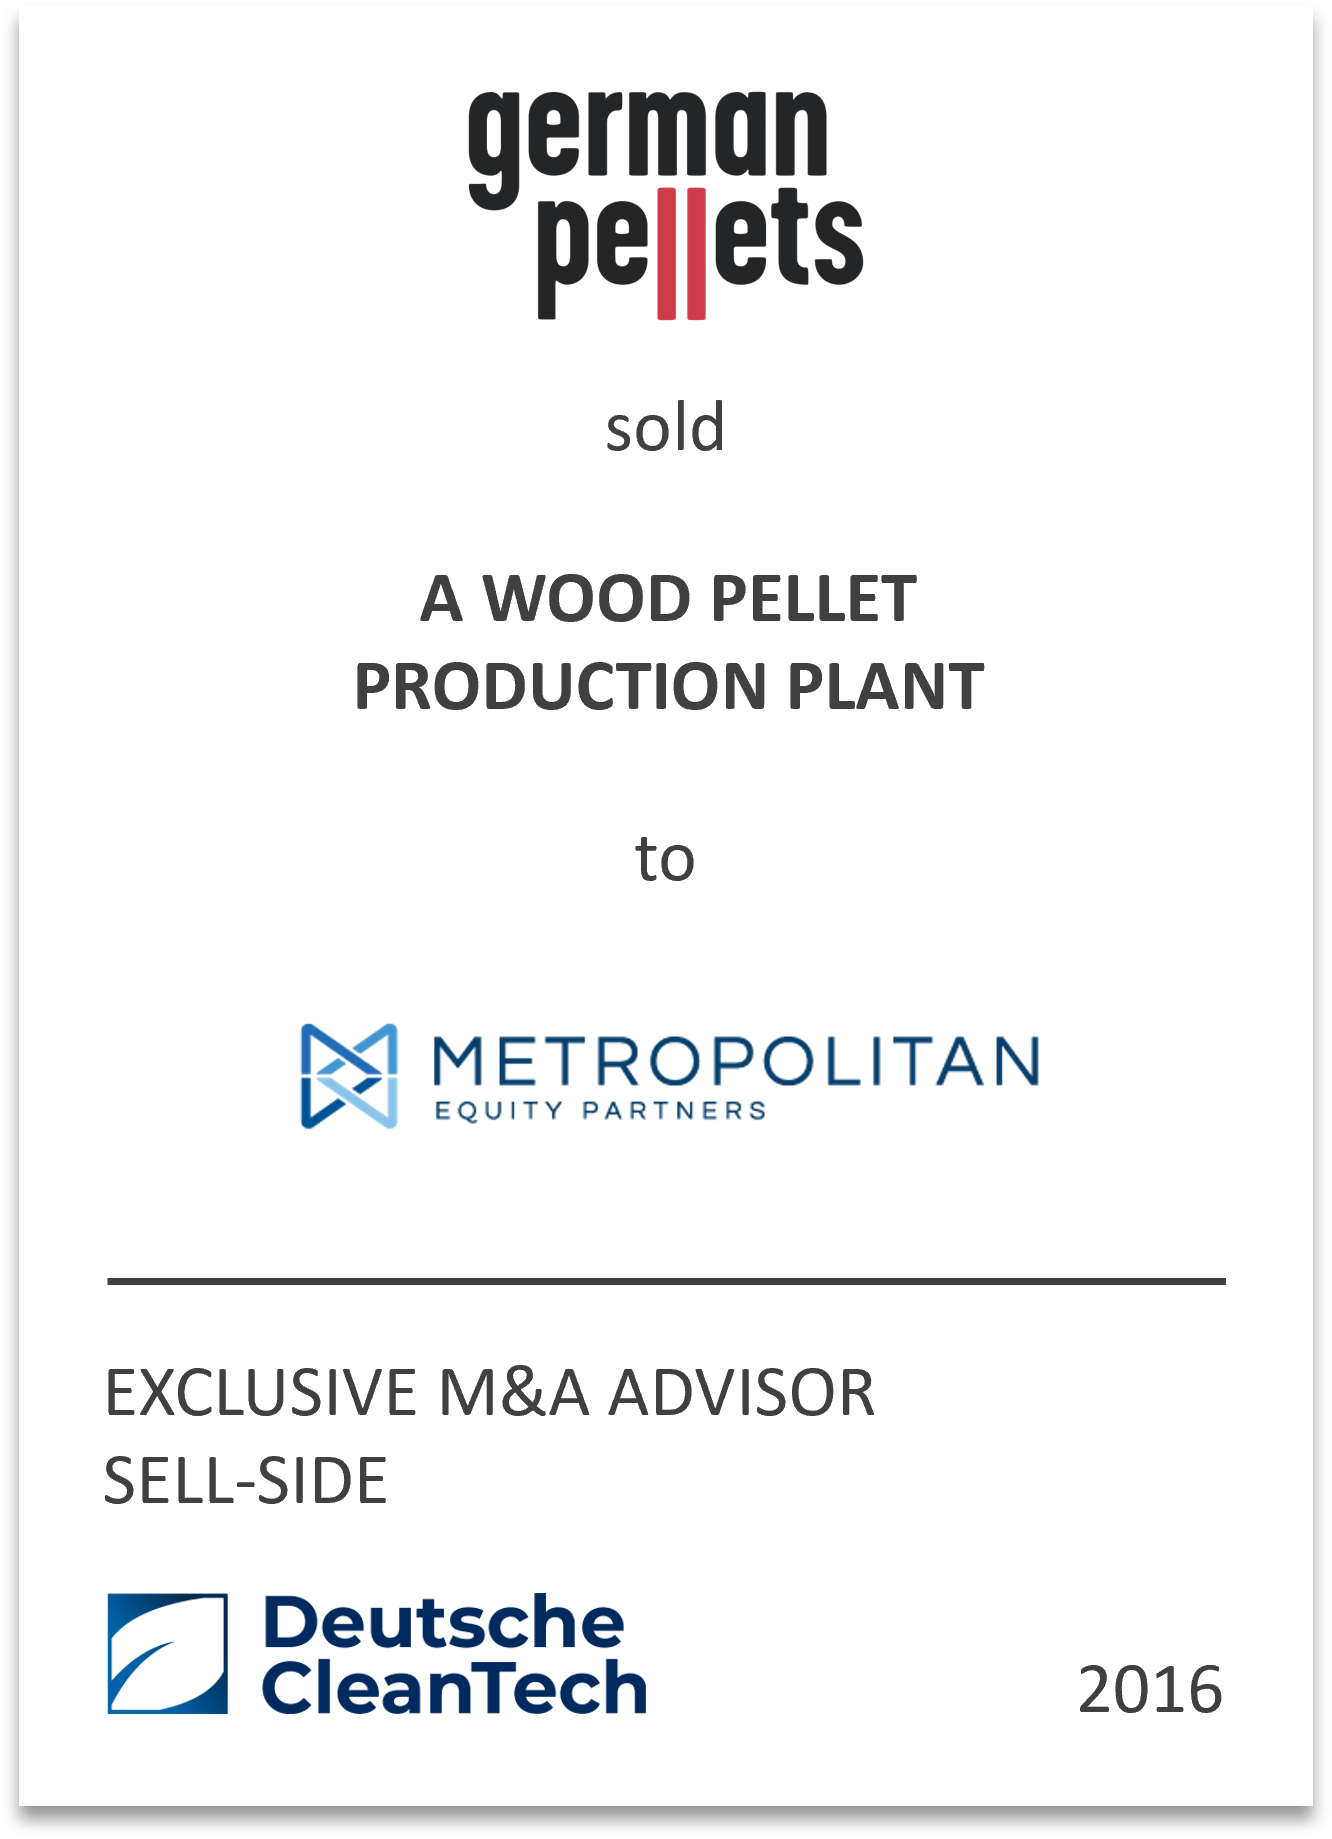 Metropolitan Equity Partners, a US-based private equity firm, has acquired the Wismar plants of German Pellets GmbH